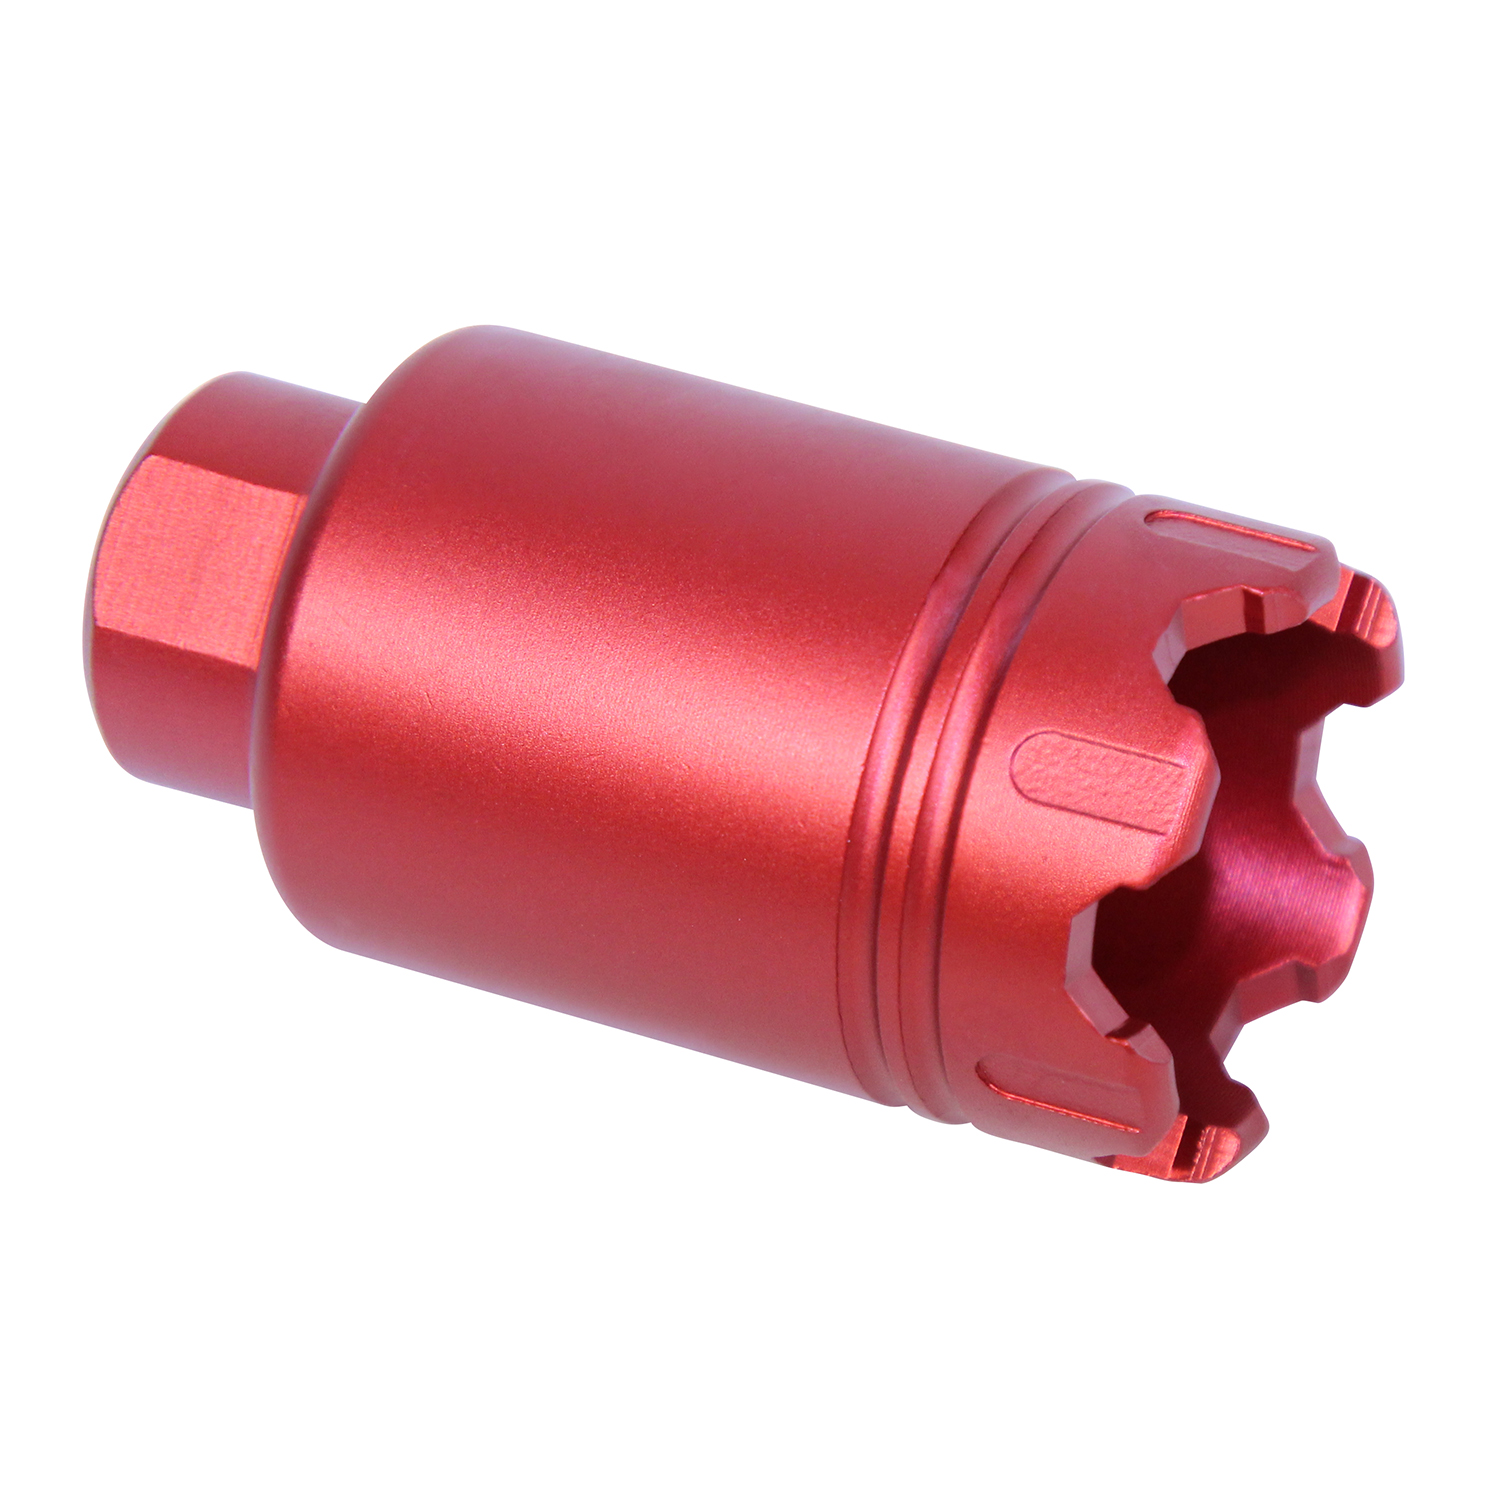 AR .308 Cal Micro 'Trident' Flash Can With Glass Breaker (Anodized Red)